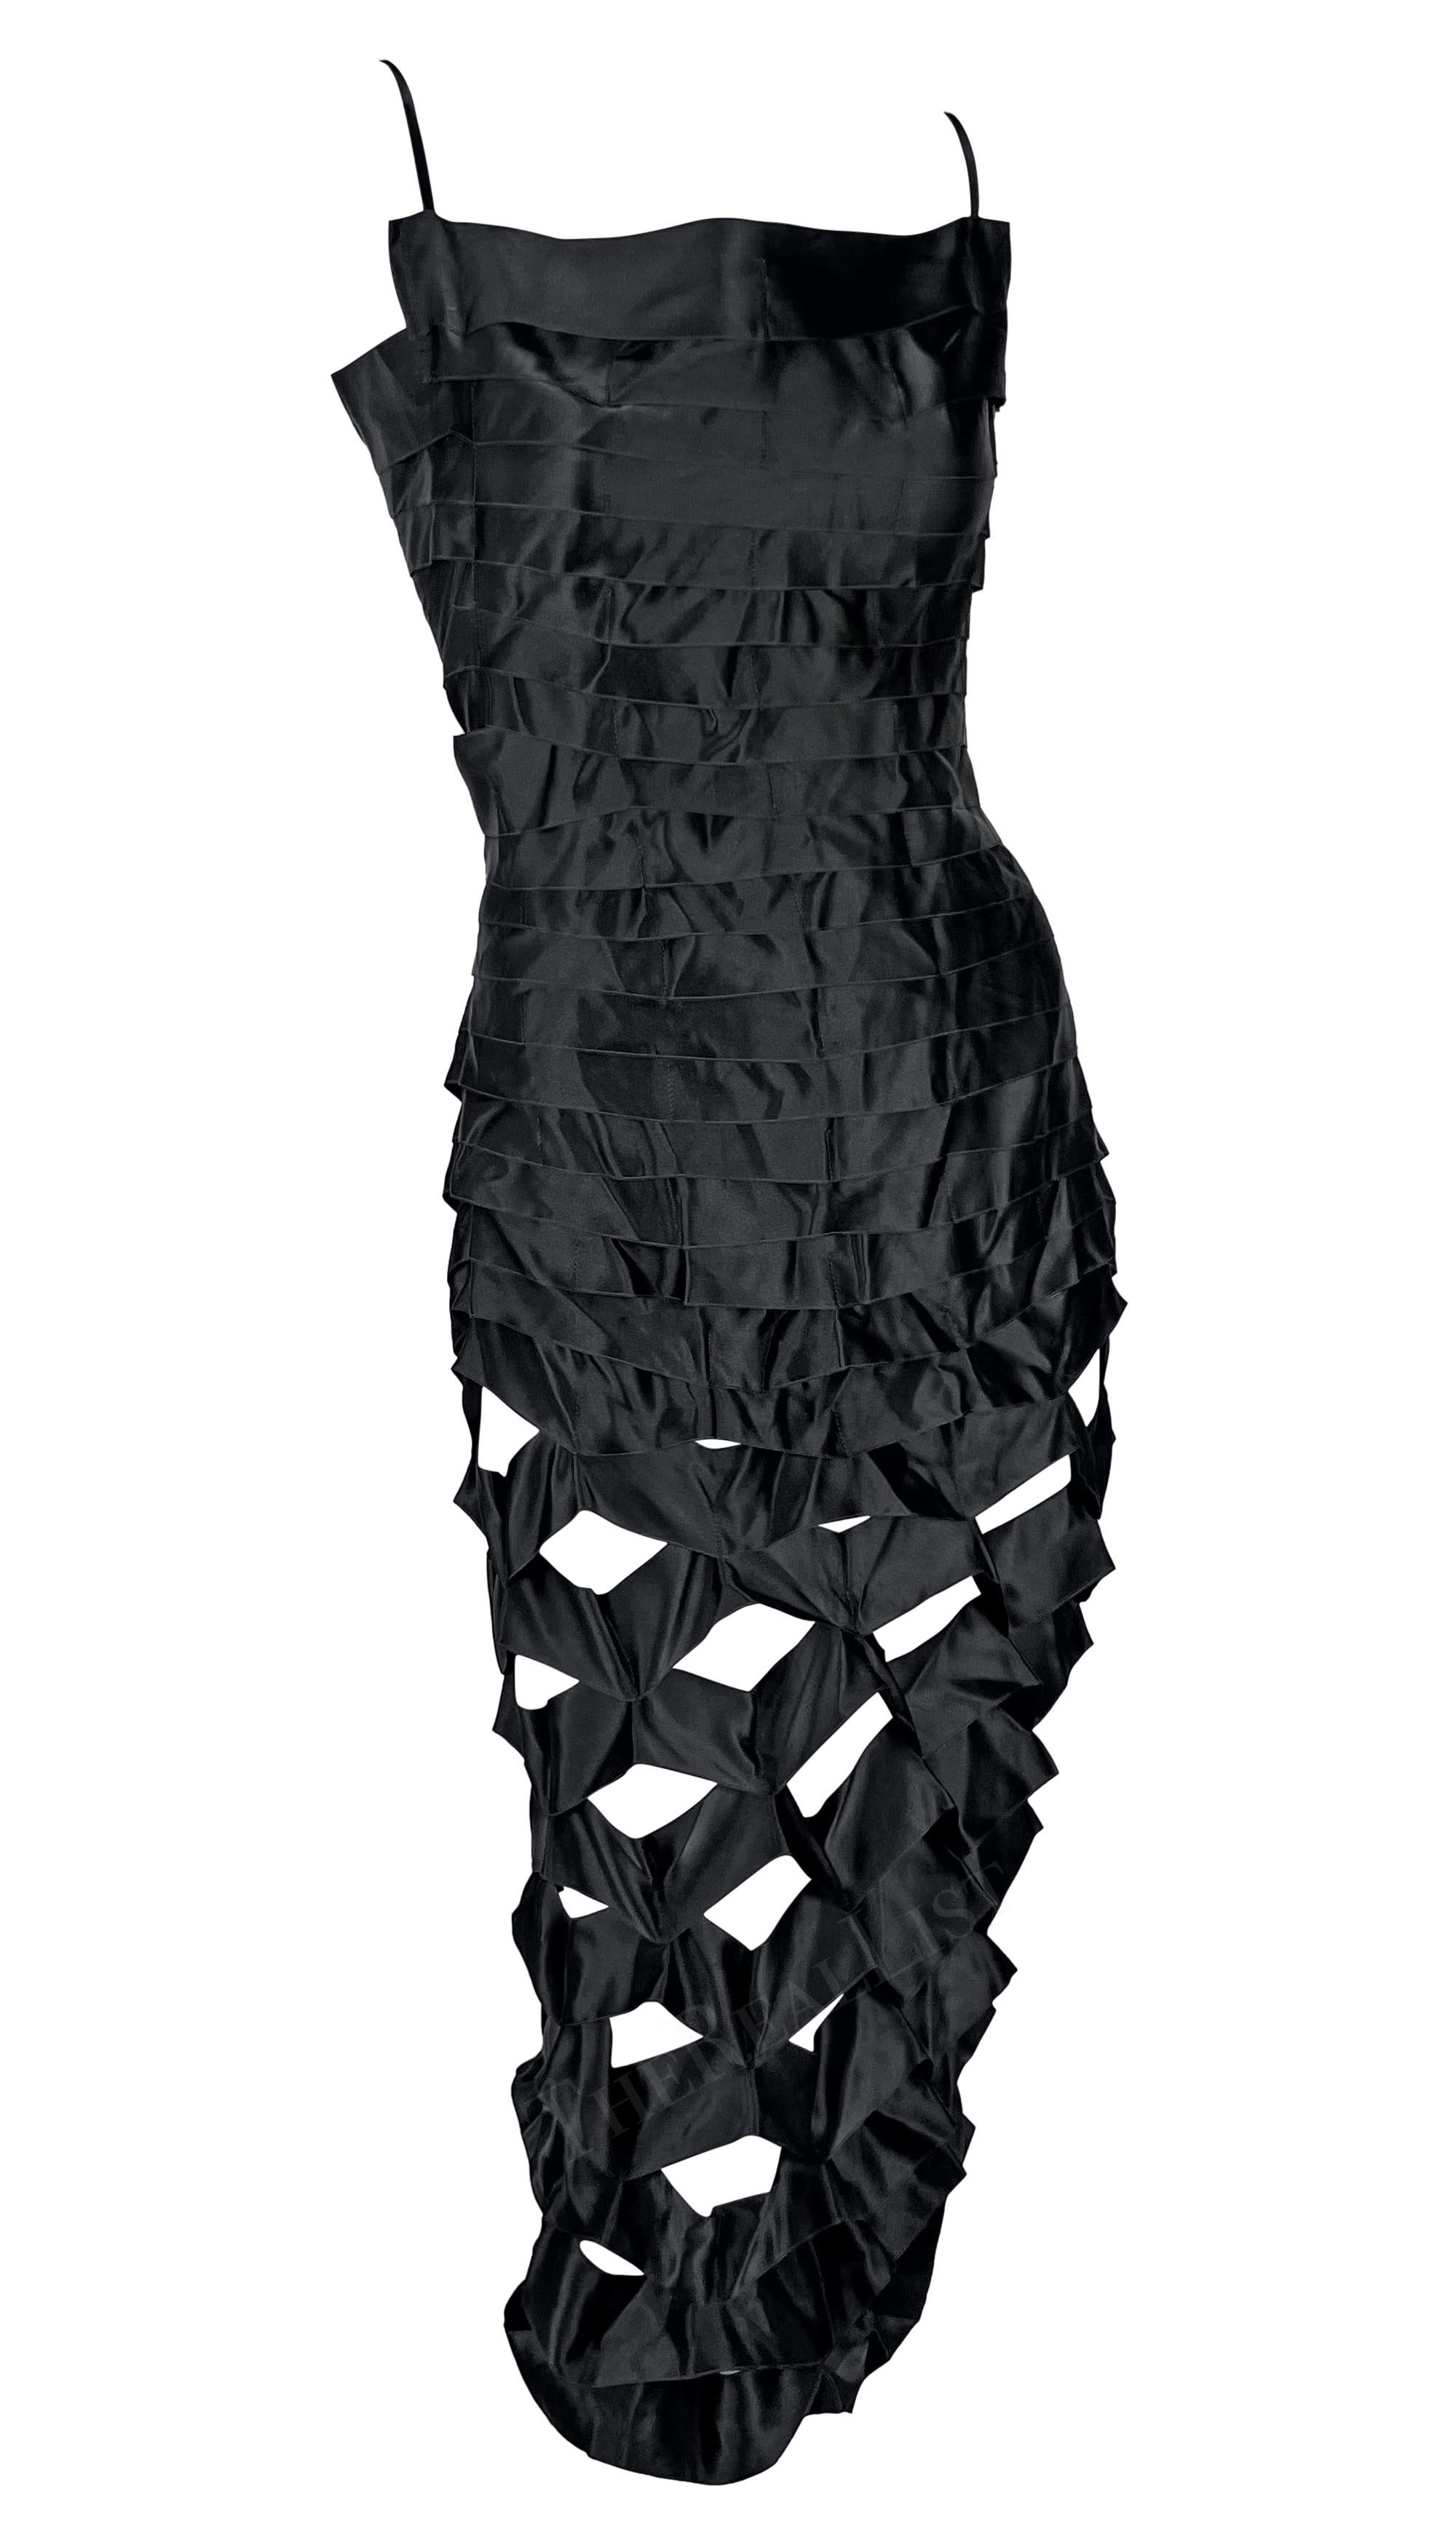 S/S 1998 Helmut Lang Black Silk Cut Out Ribbon Runway Gown  For Sale 7